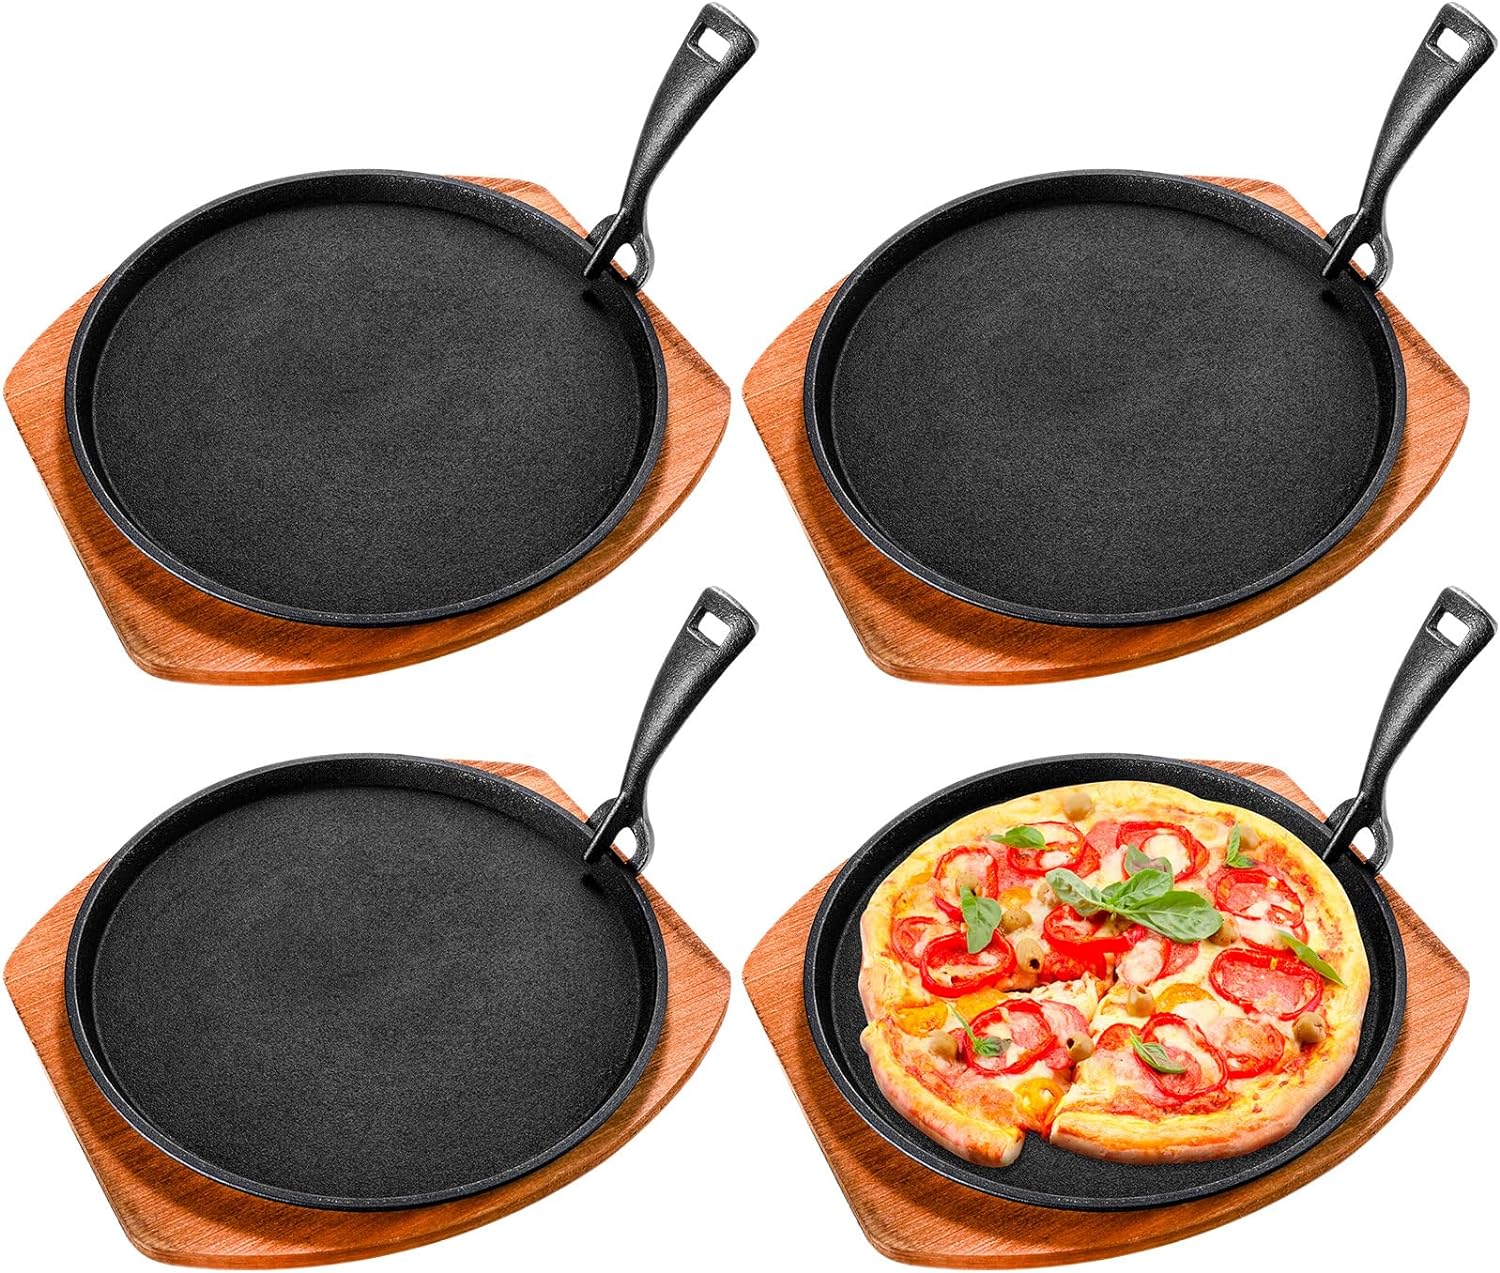 Cast Iron Fajita Plate Set 9.84” Steak Plate Sizzling Pan with Wooden Base and Gripper for Home Restaurant Kitchen Catering Cooking for Grilling Meats Seafood(4 Sets)